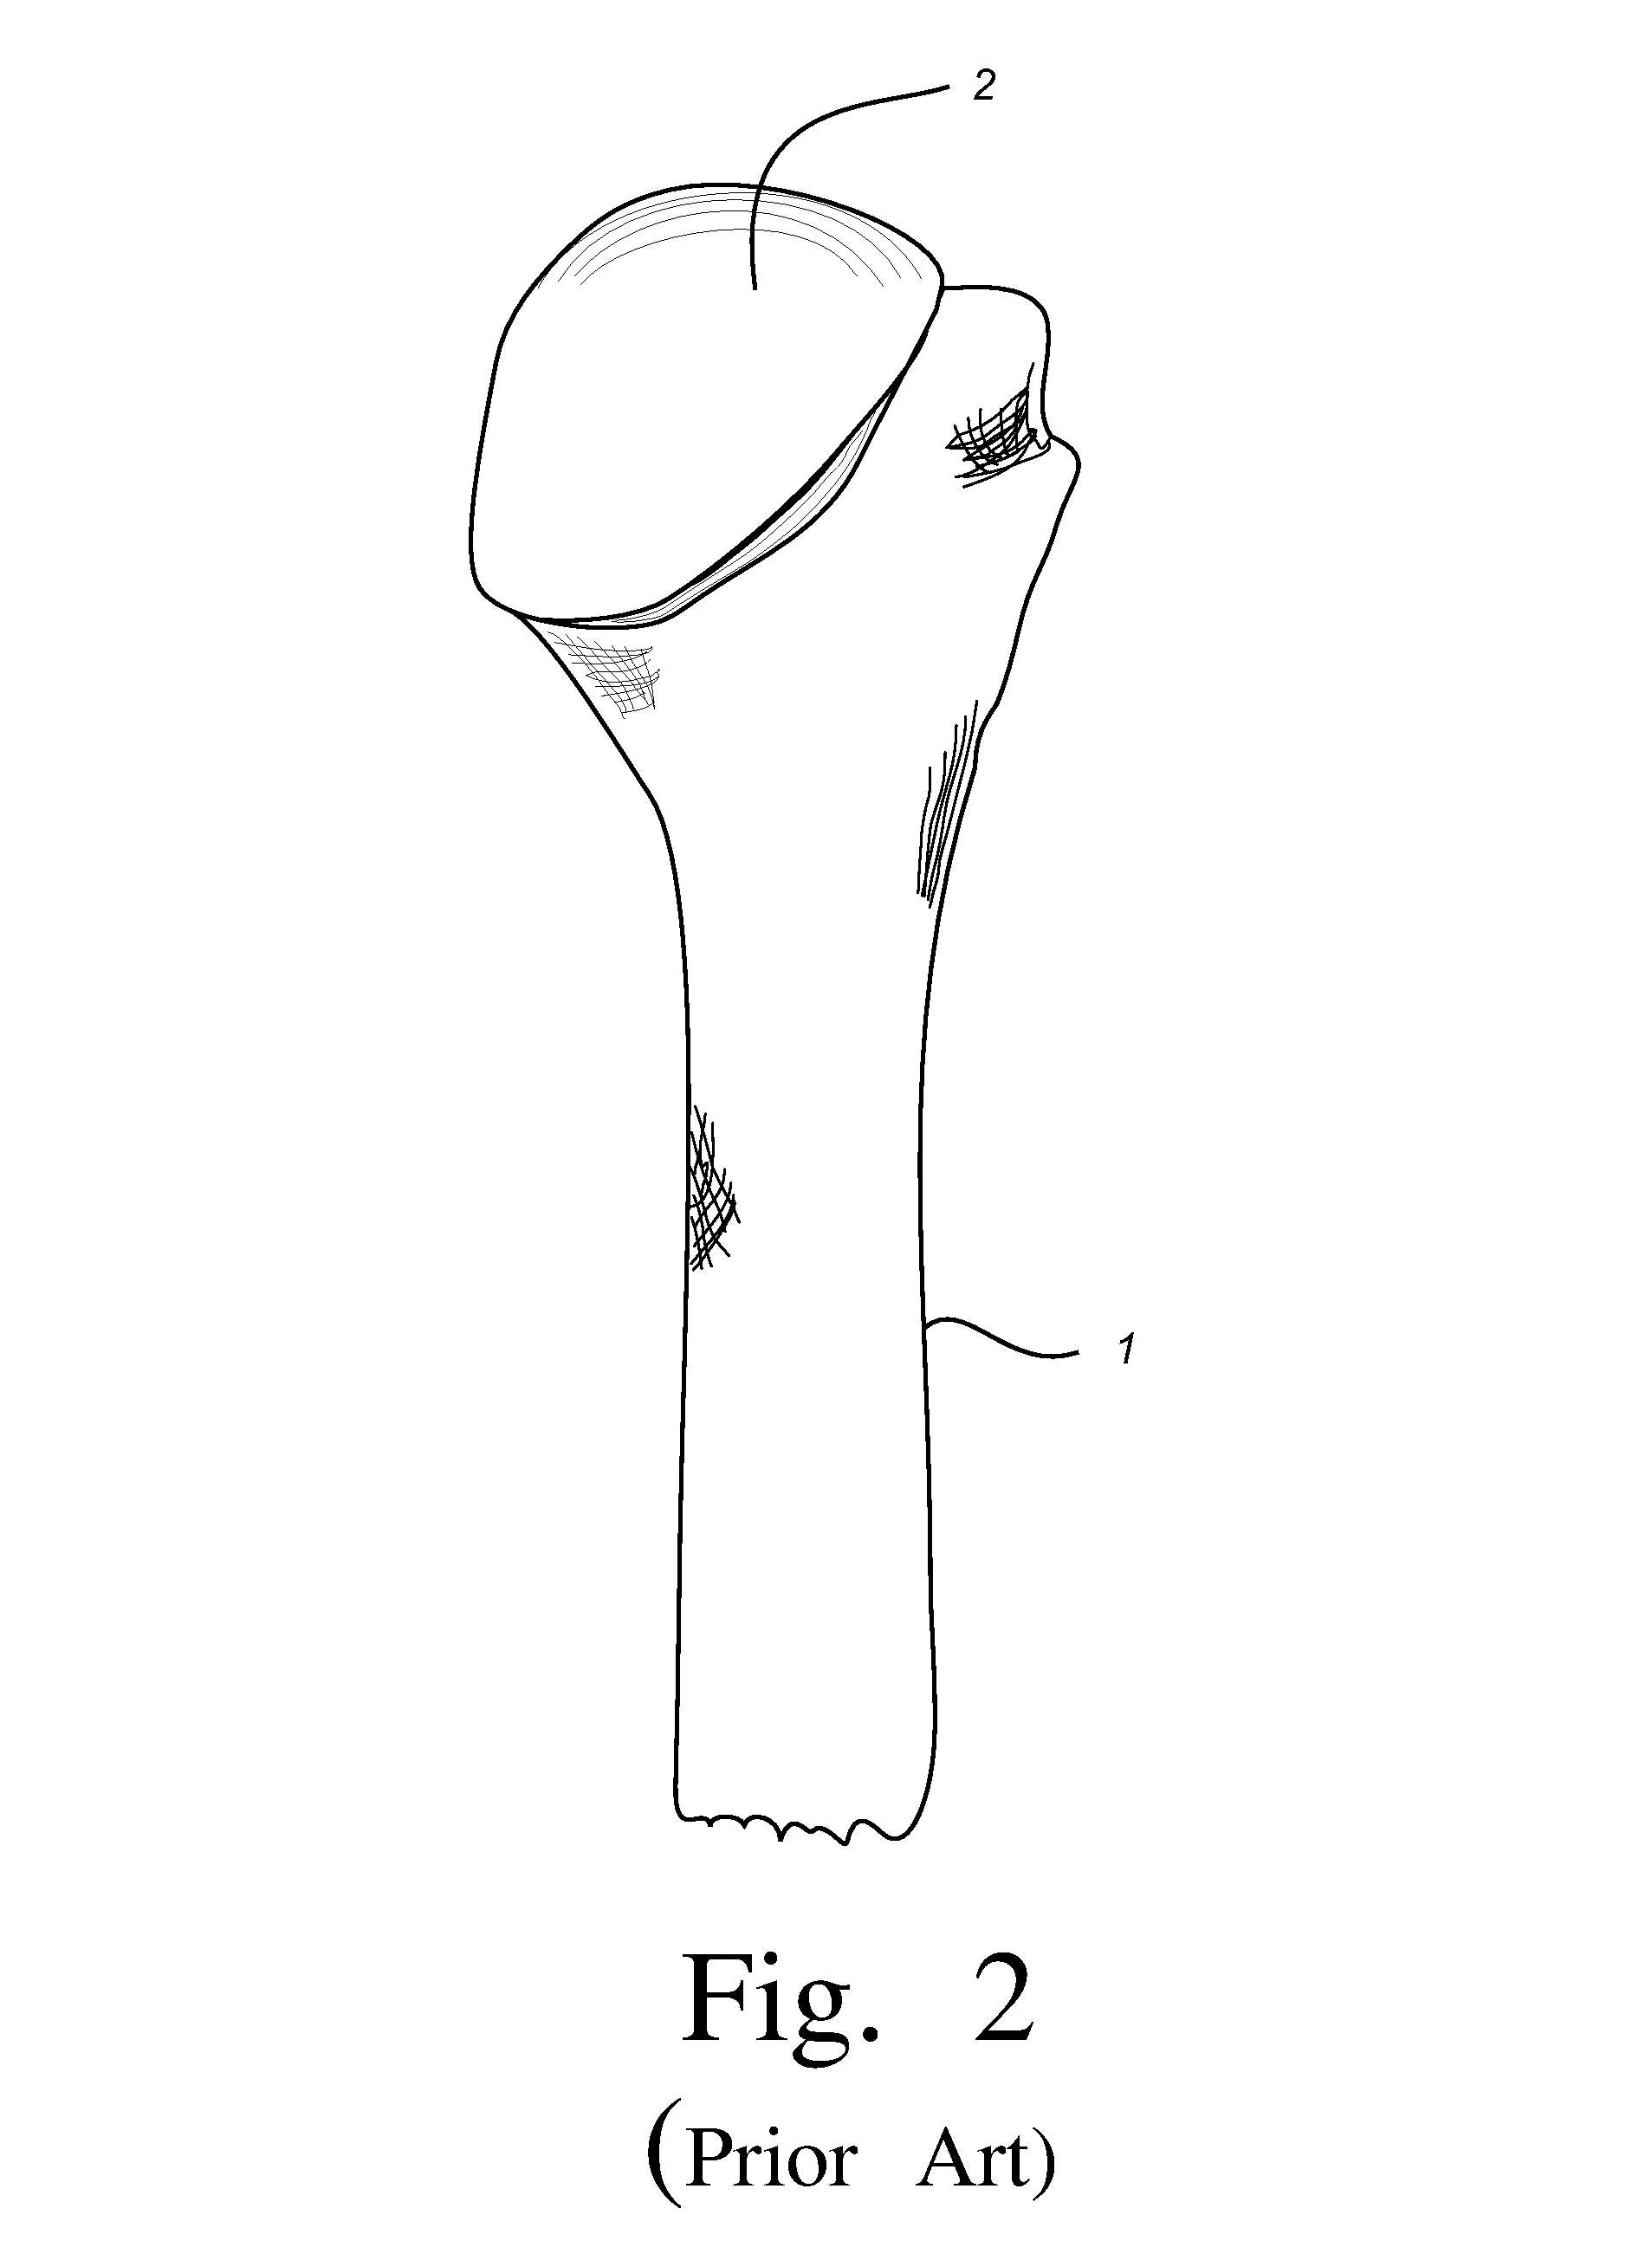 Extended articulation orthopaedic implant and associated method